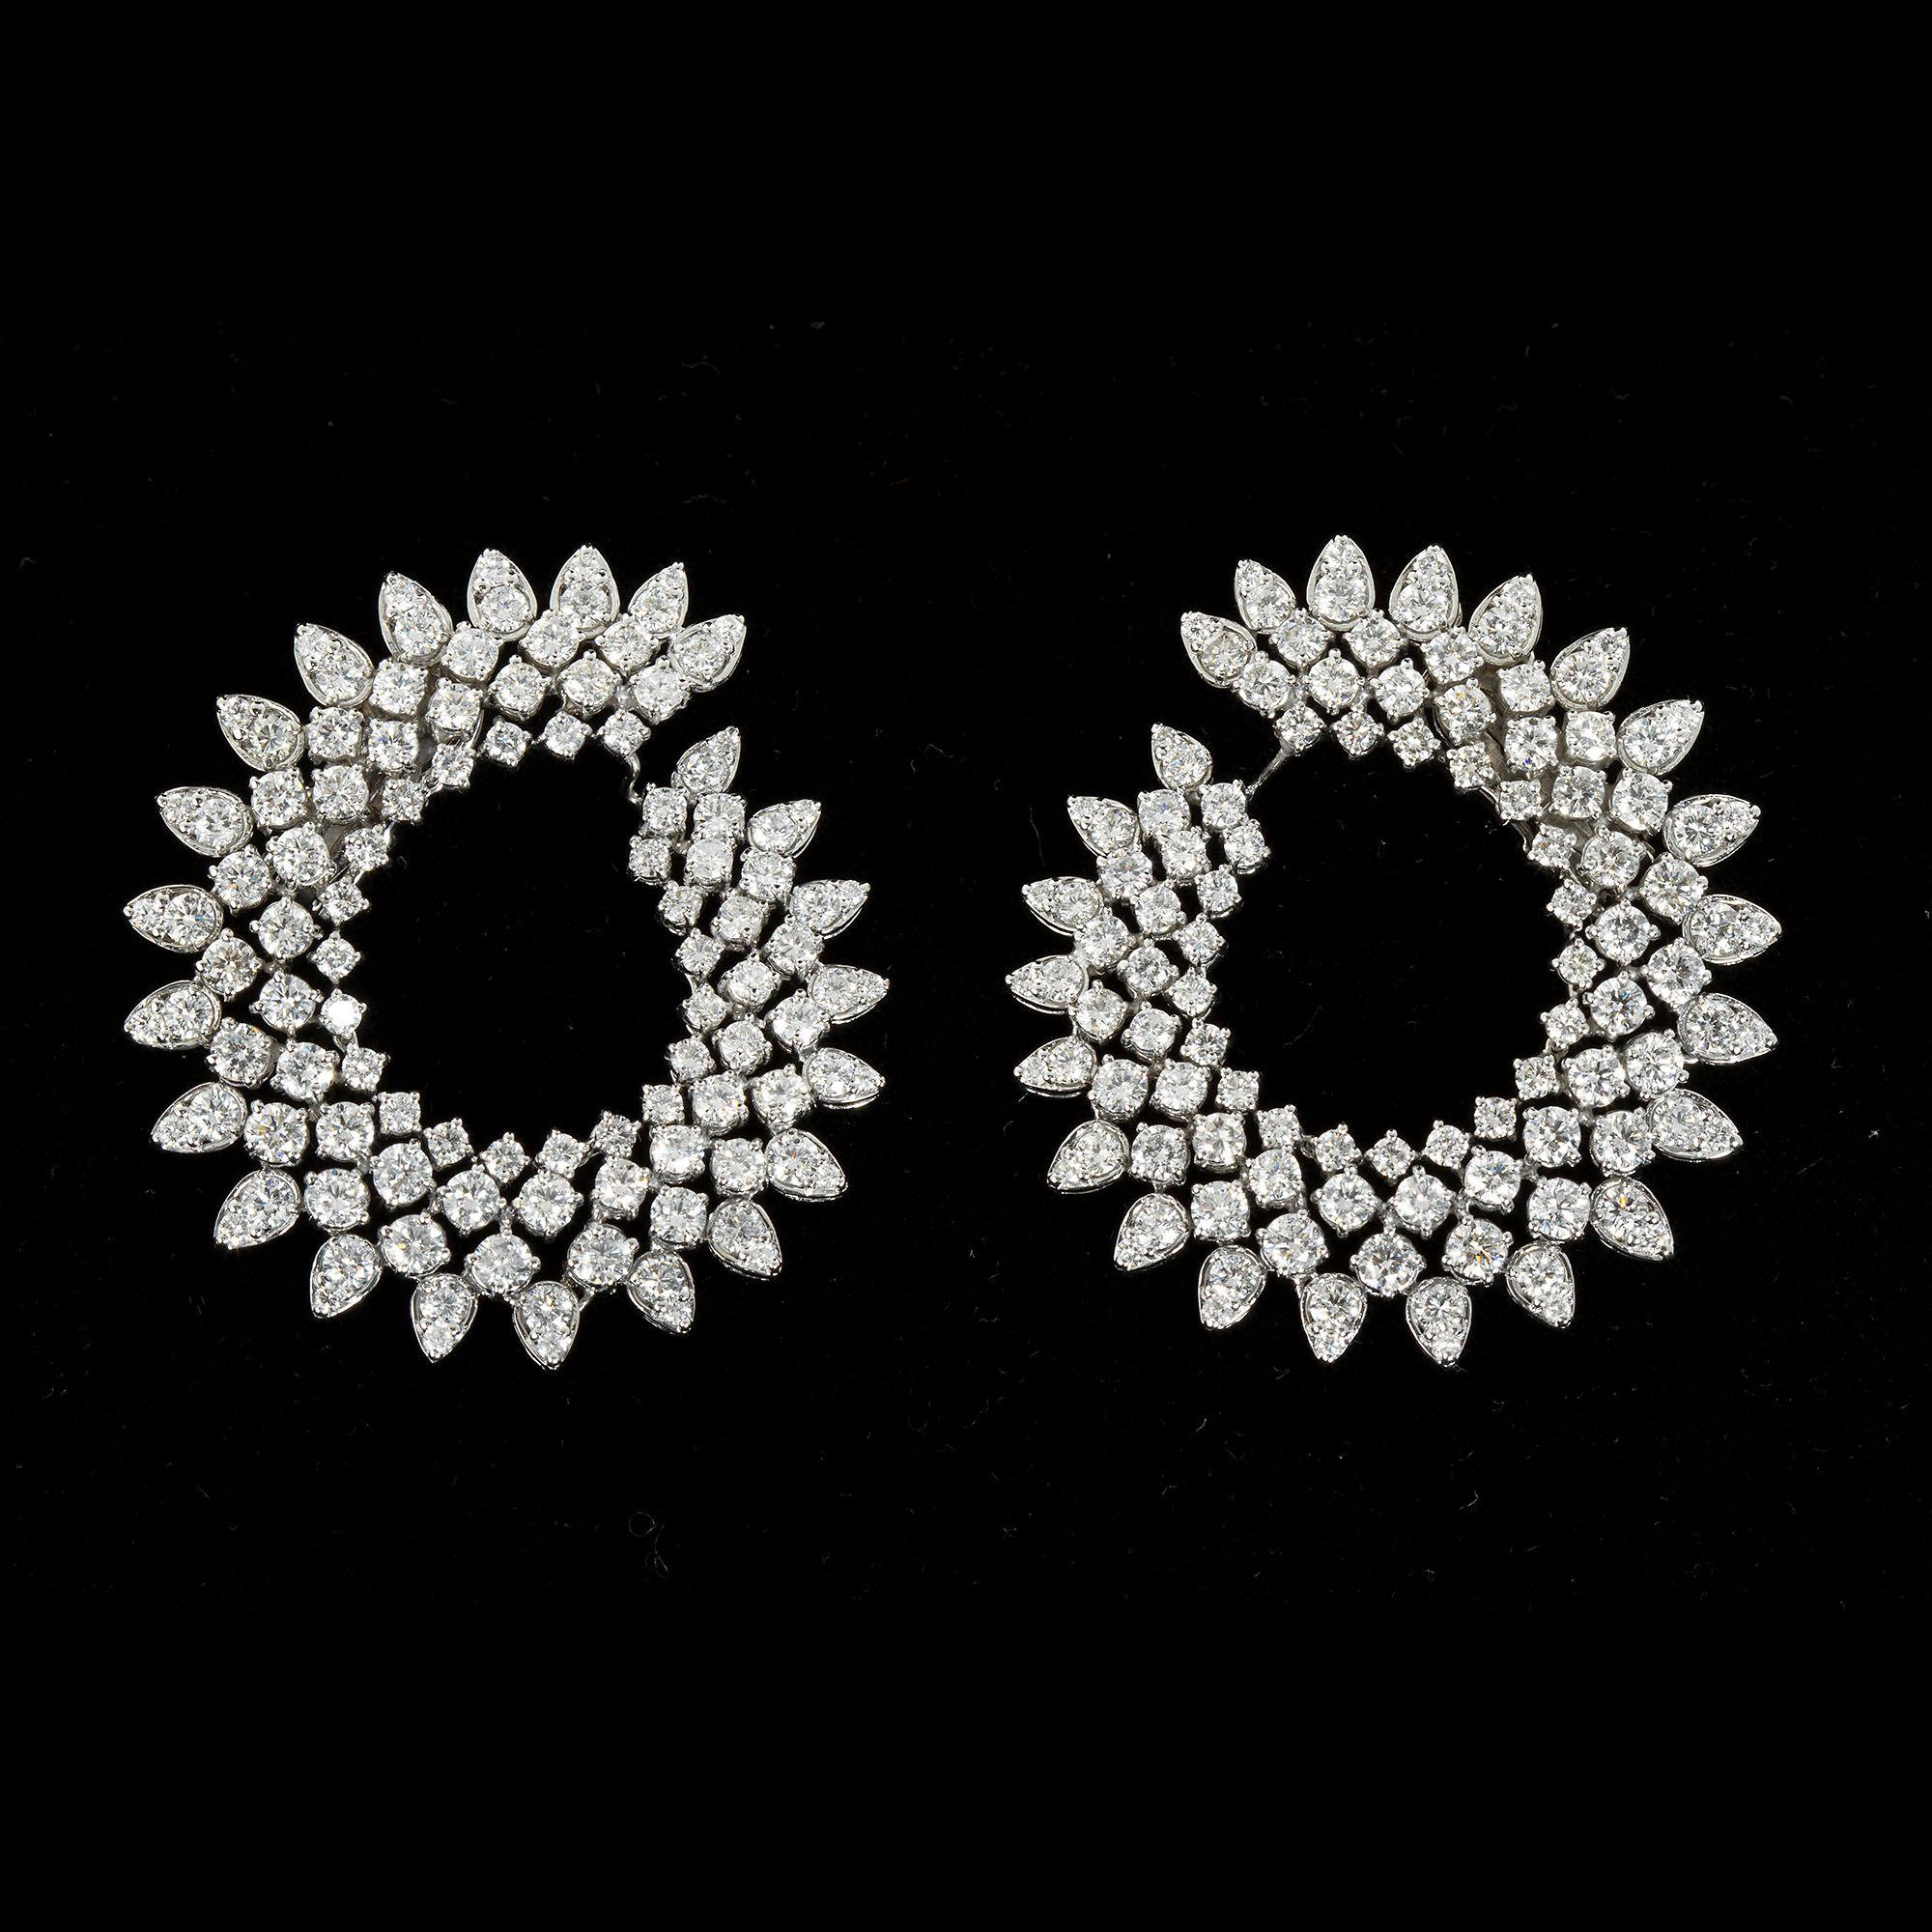 Stunning eye catching Diamond earrings. weighing close to 16 carats of round brilliant cut Diamond. Set in 18k white Gold. measuring 2 inch in diameter,
These attractive brilliant Diamond earrings, are truly red carpet ready